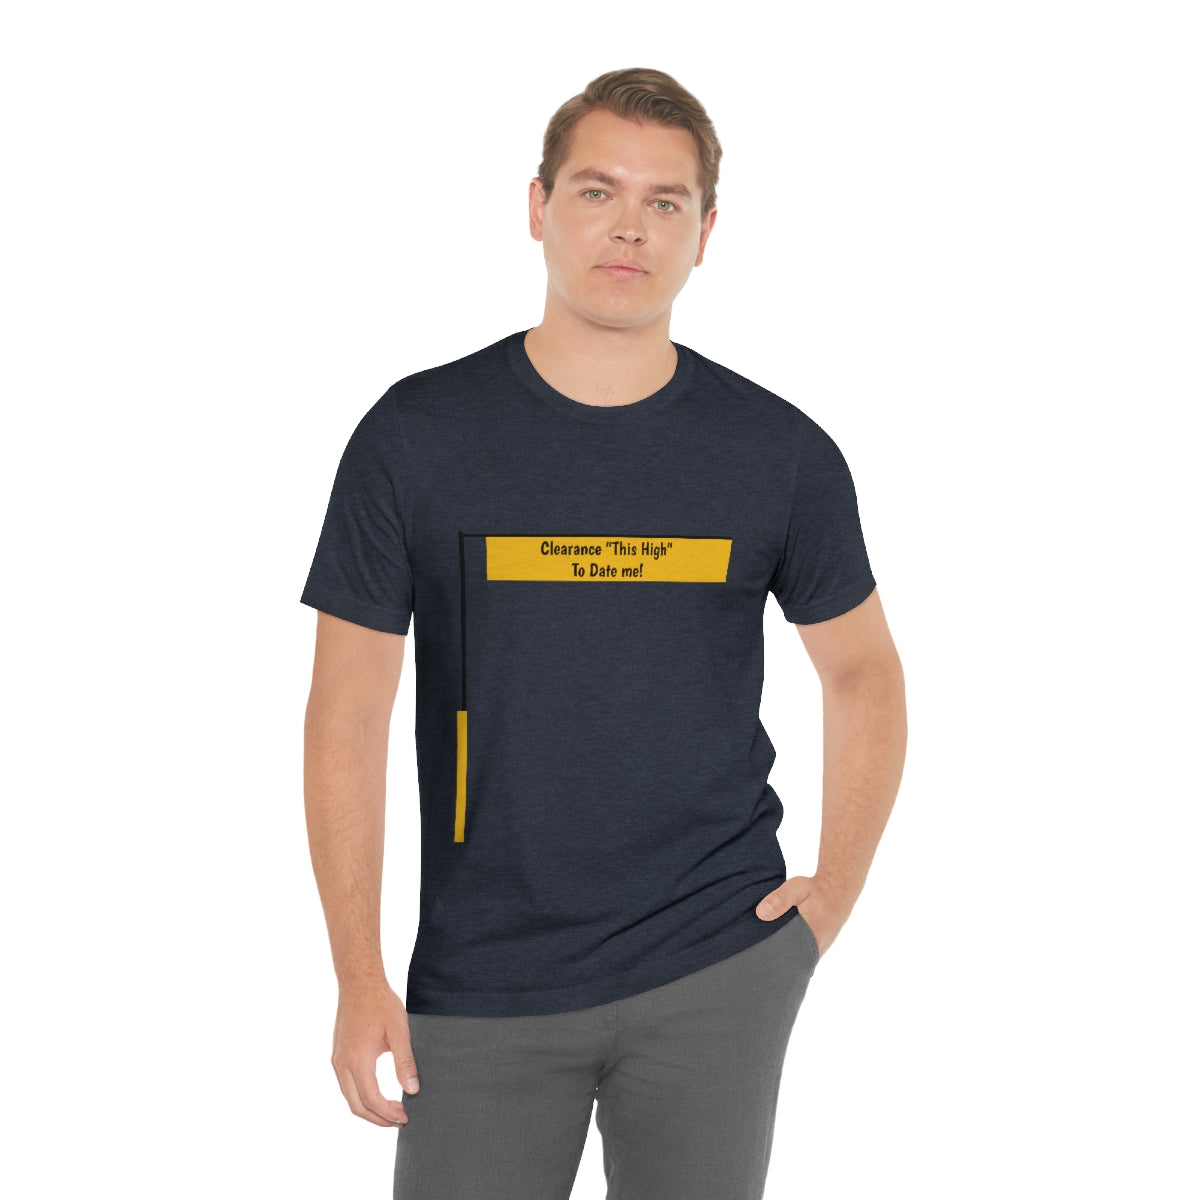 Funny - Clearance Must be "This High" to Date me - Unisex Short Sleeve Tee